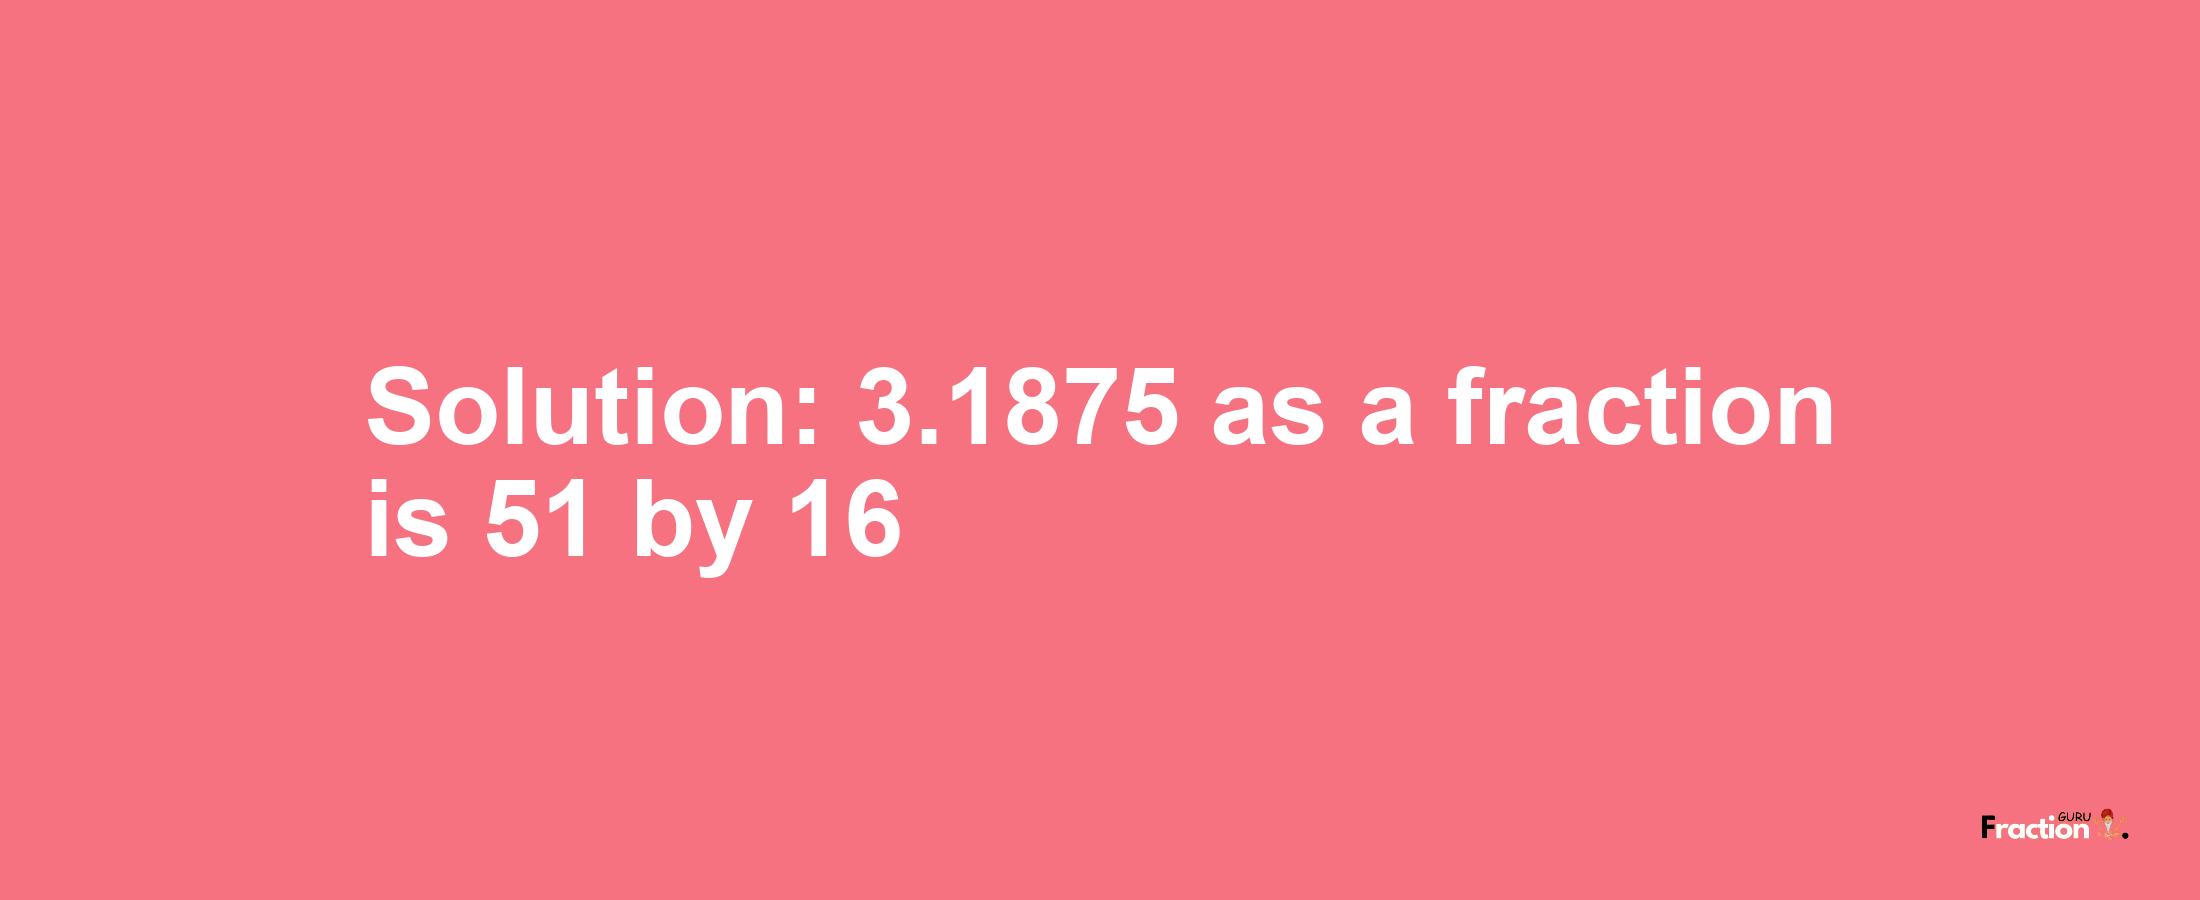 Solution:3.1875 as a fraction is 51/16